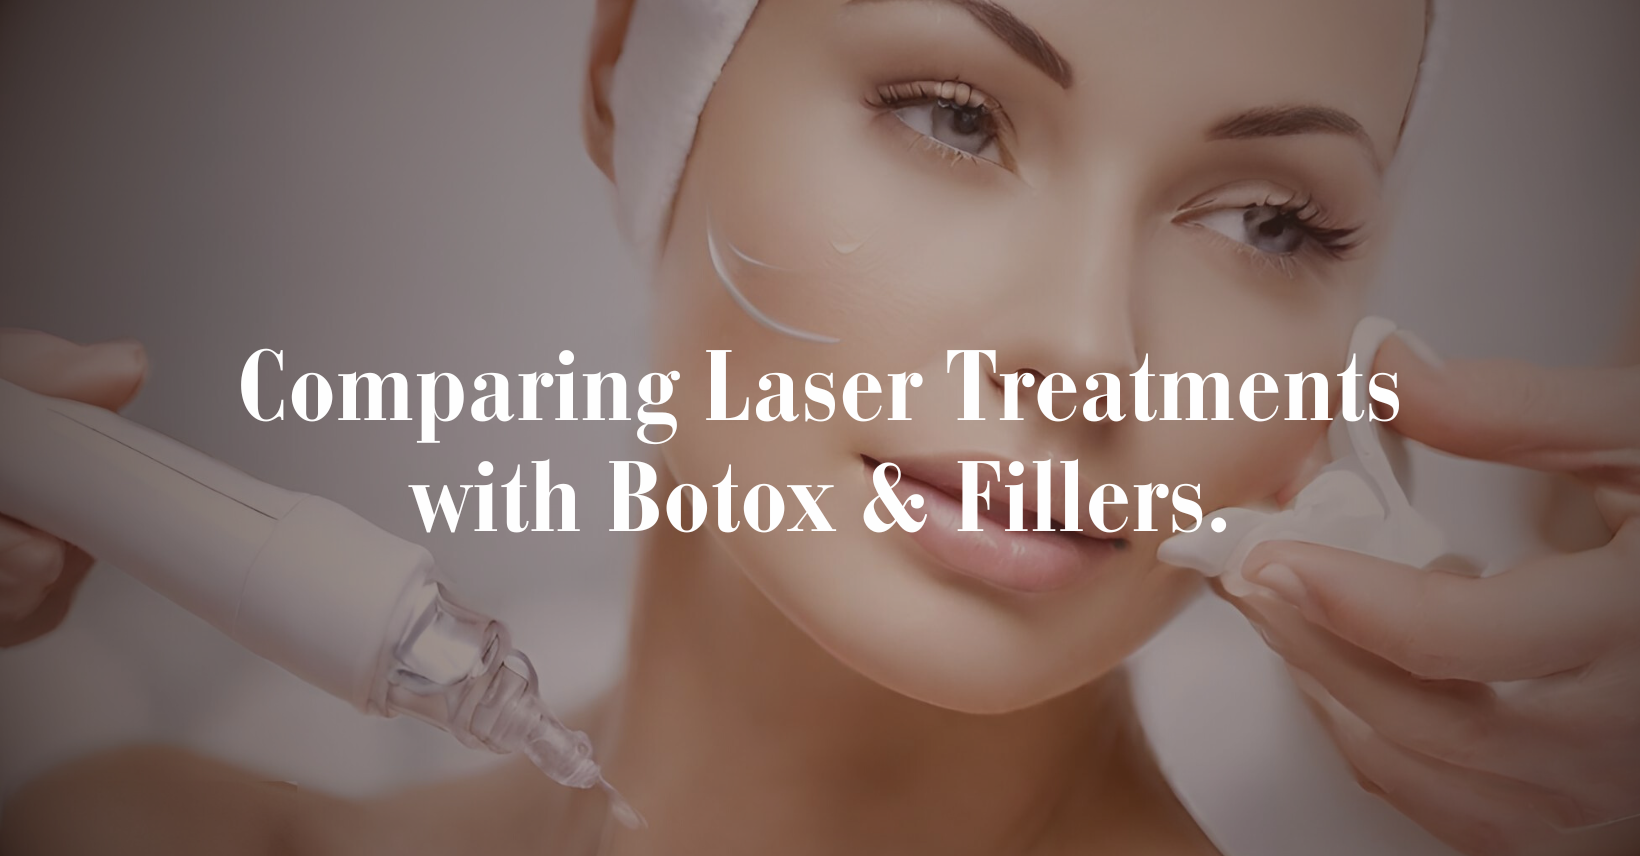 Comparing Laser Treatments with Botox & Fillers.